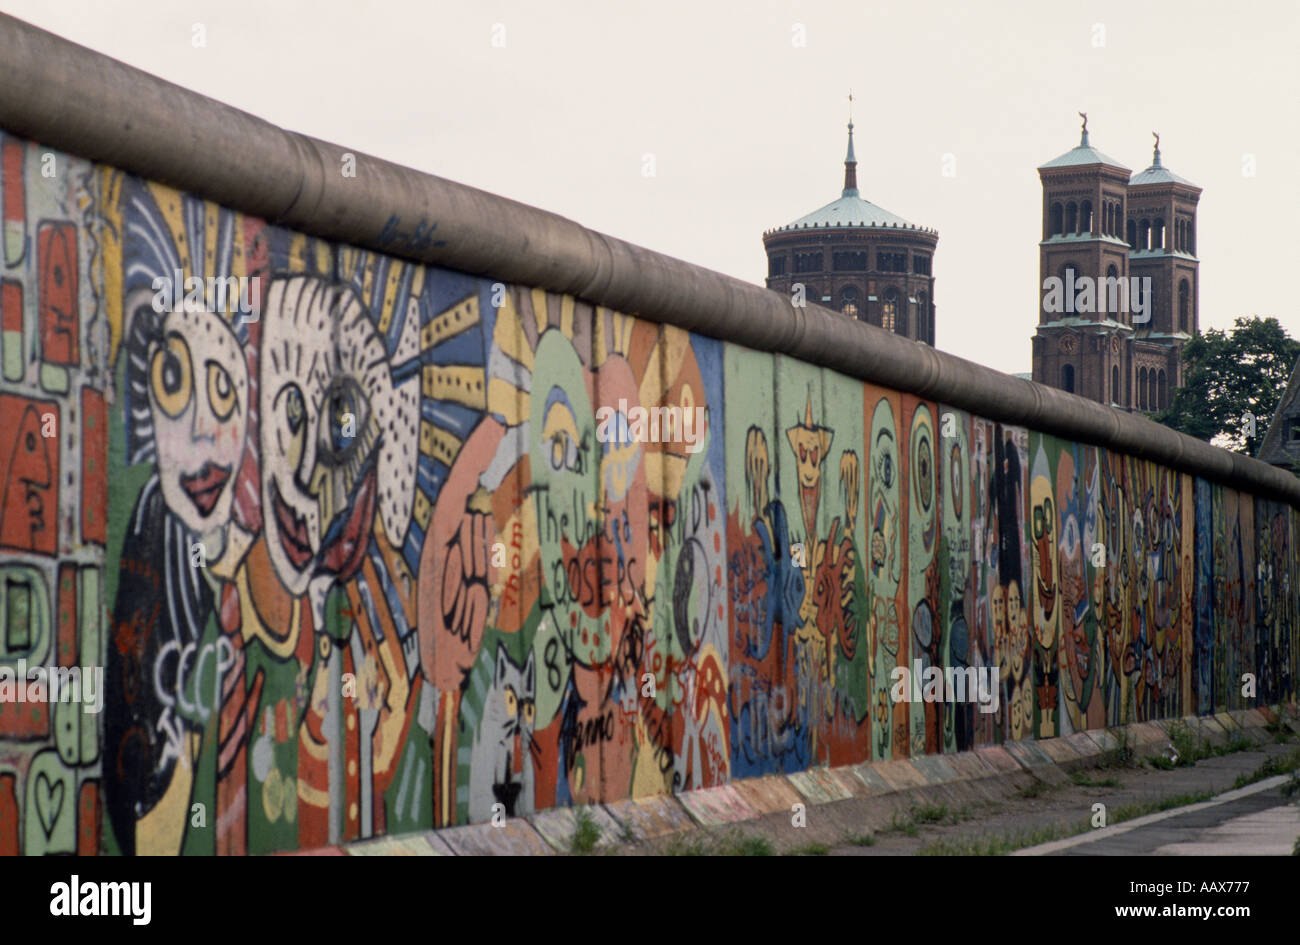 European History. The historical Berlin Wall in West Berlin in Germany in Europe during the Cold War. Stock Photo